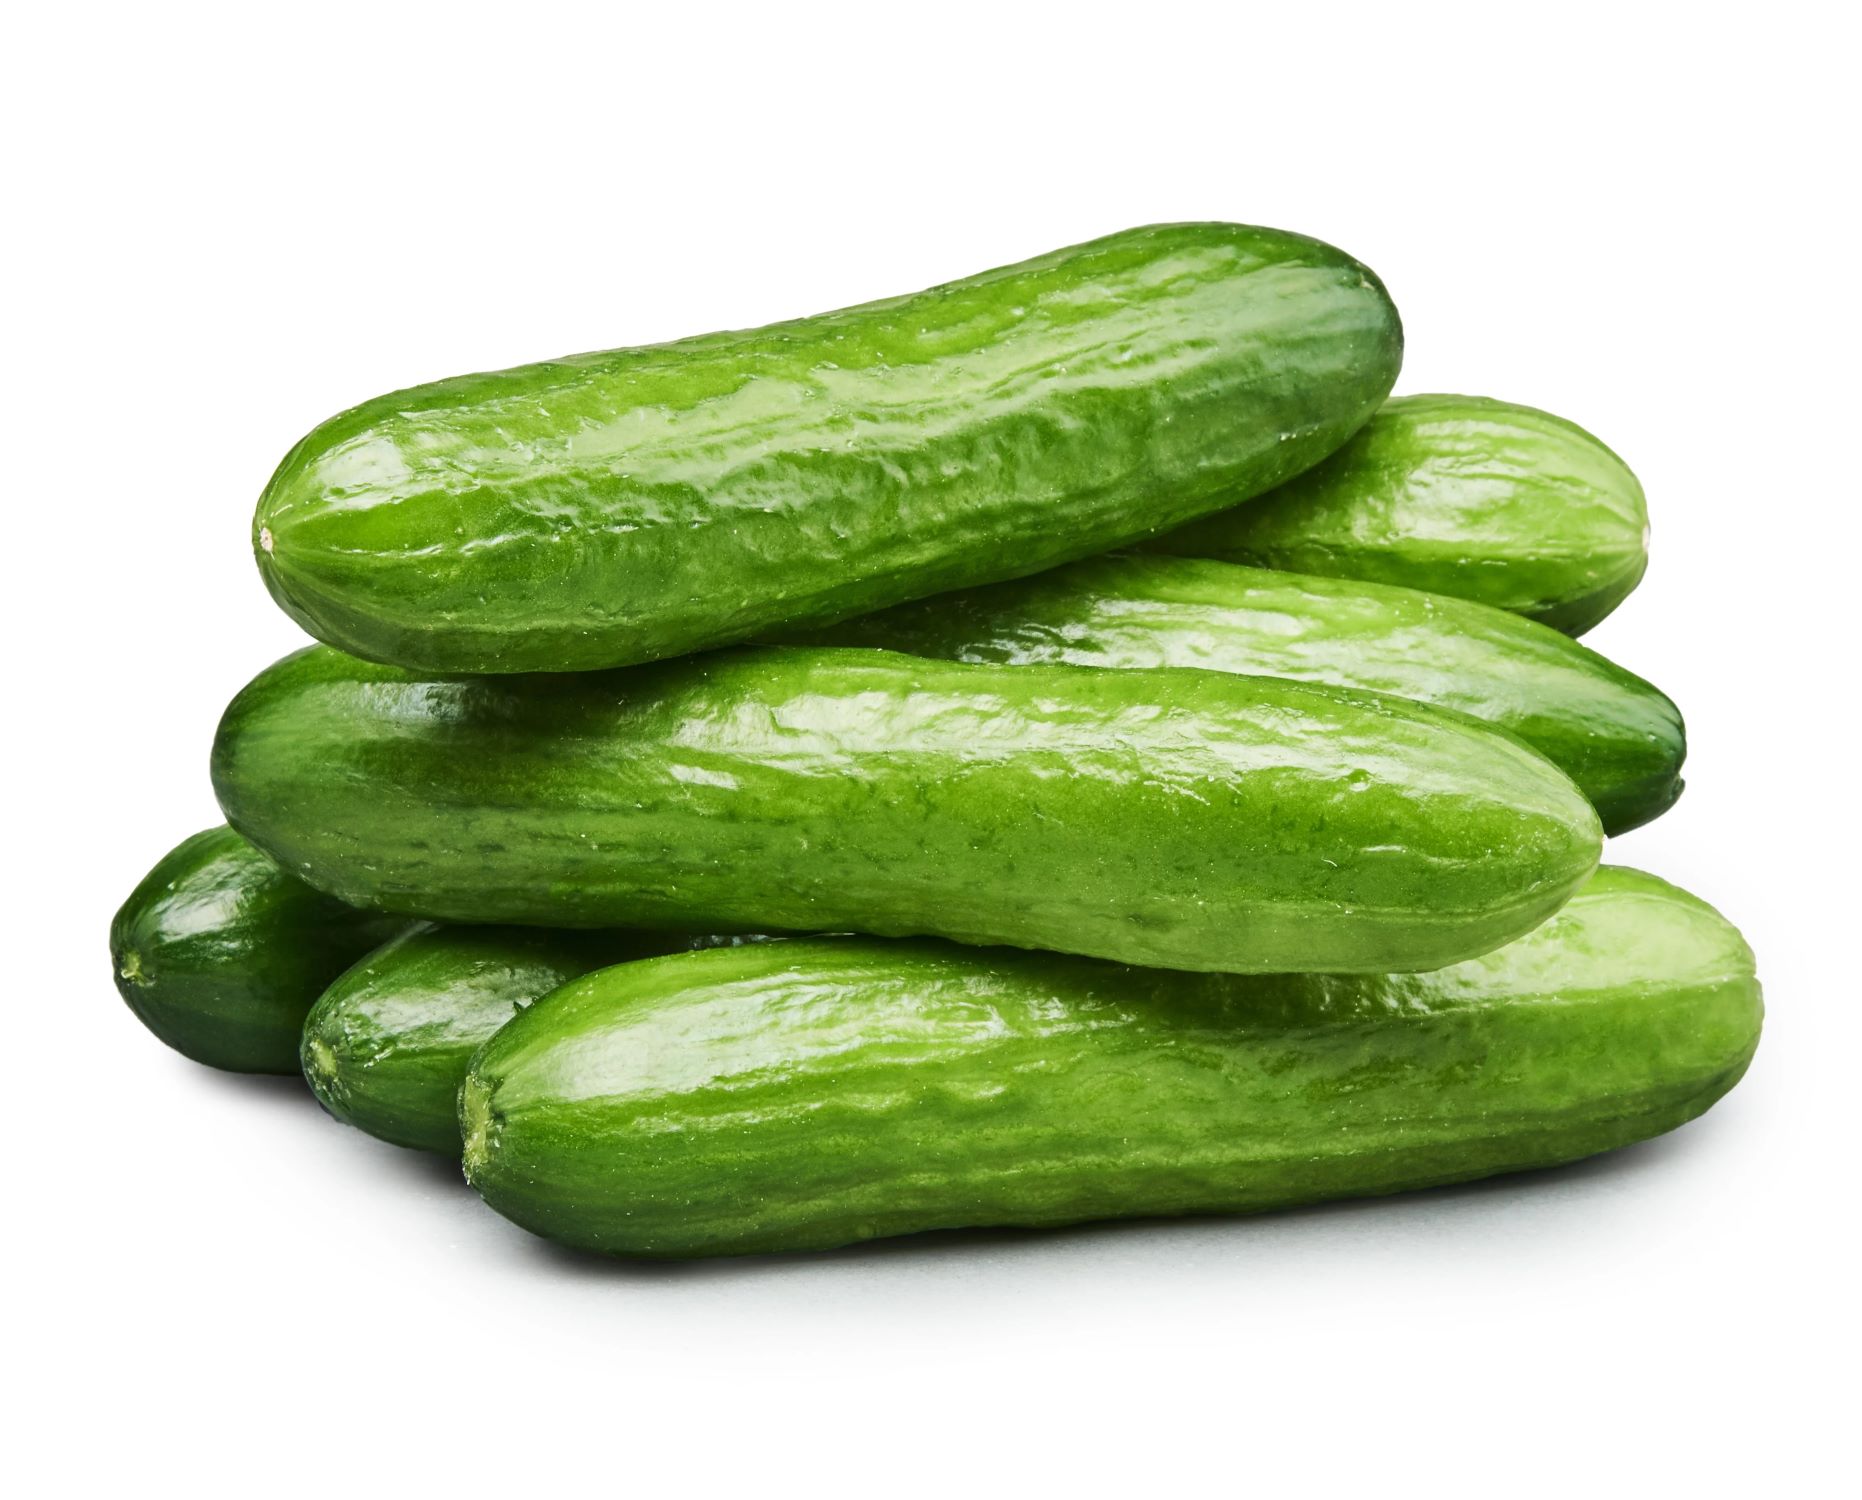 10-mini-cucumber-nutrition-facts